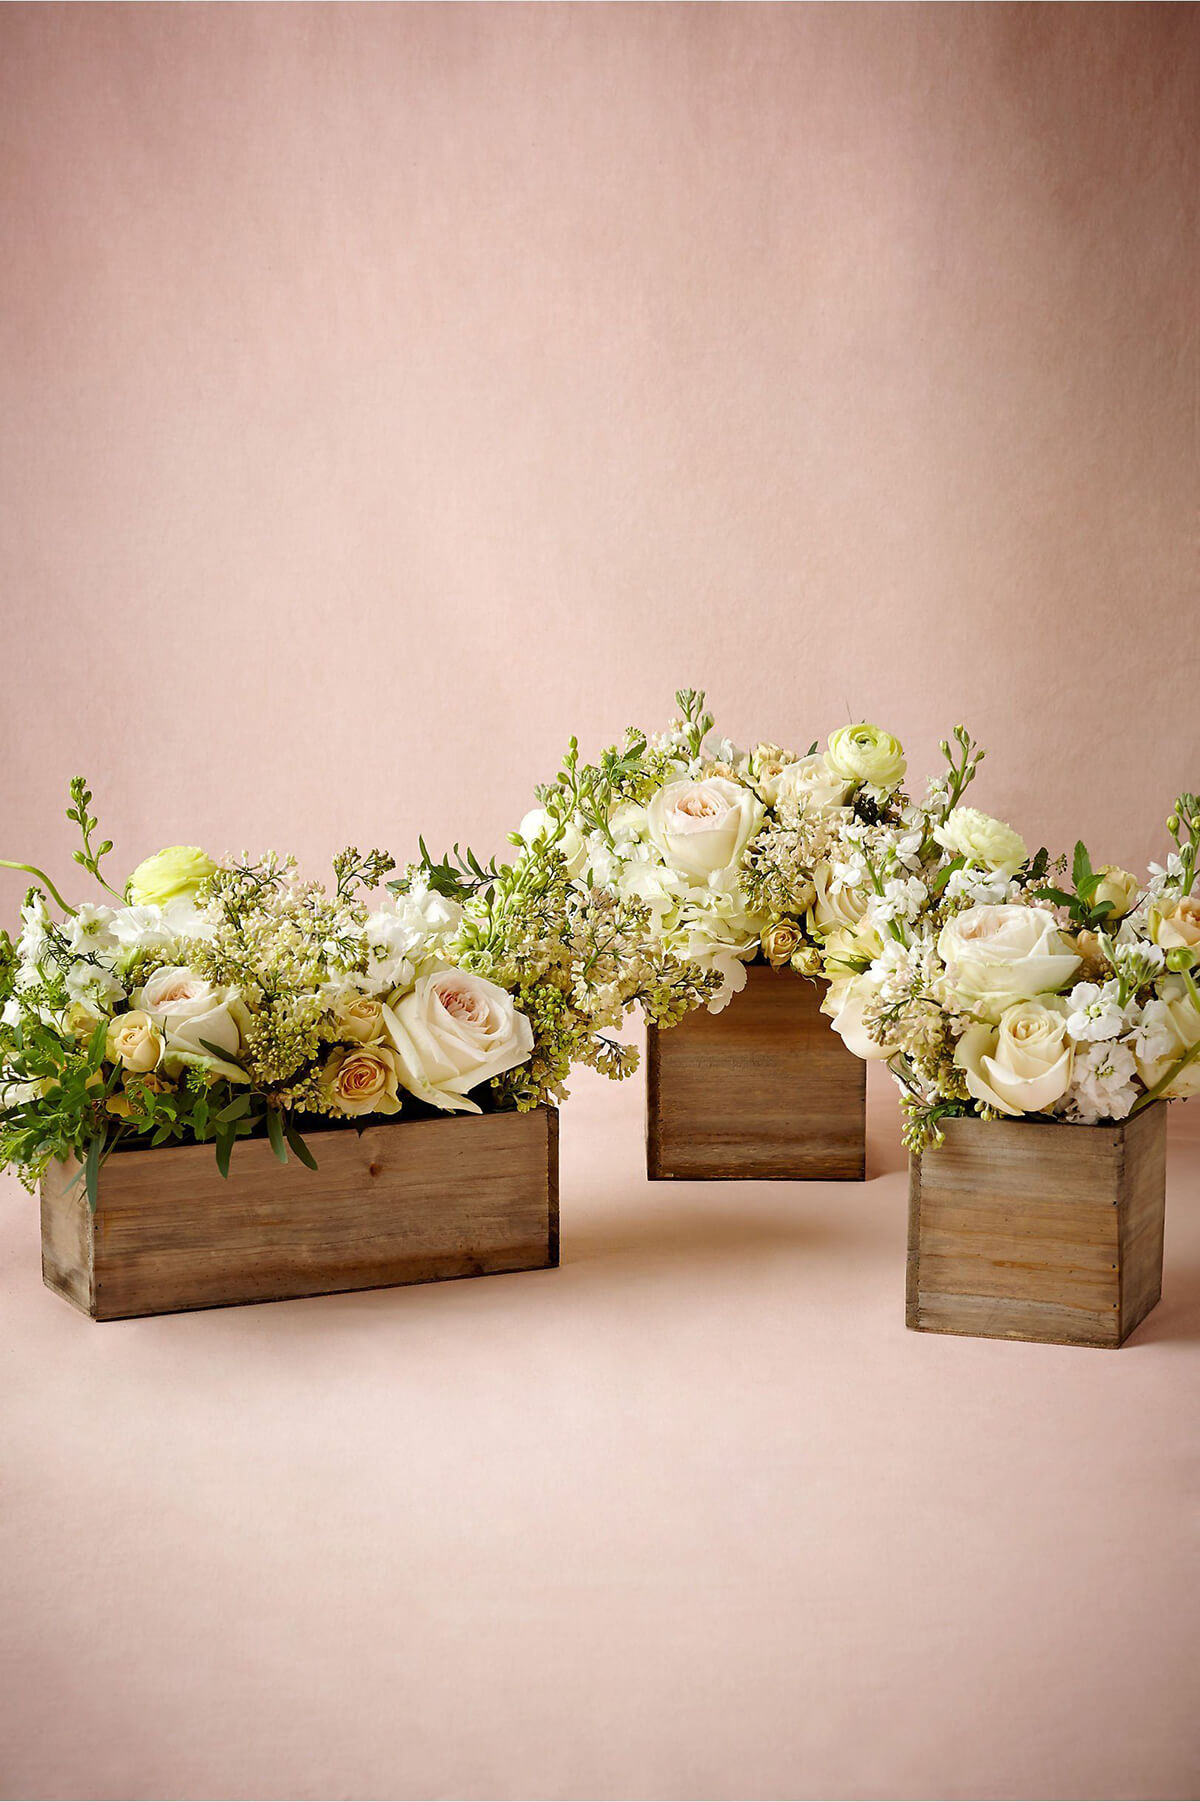 Rustic Wooden Box Centerpiece Ideas, Small Wooden Boxes For Wedding Centerpieces